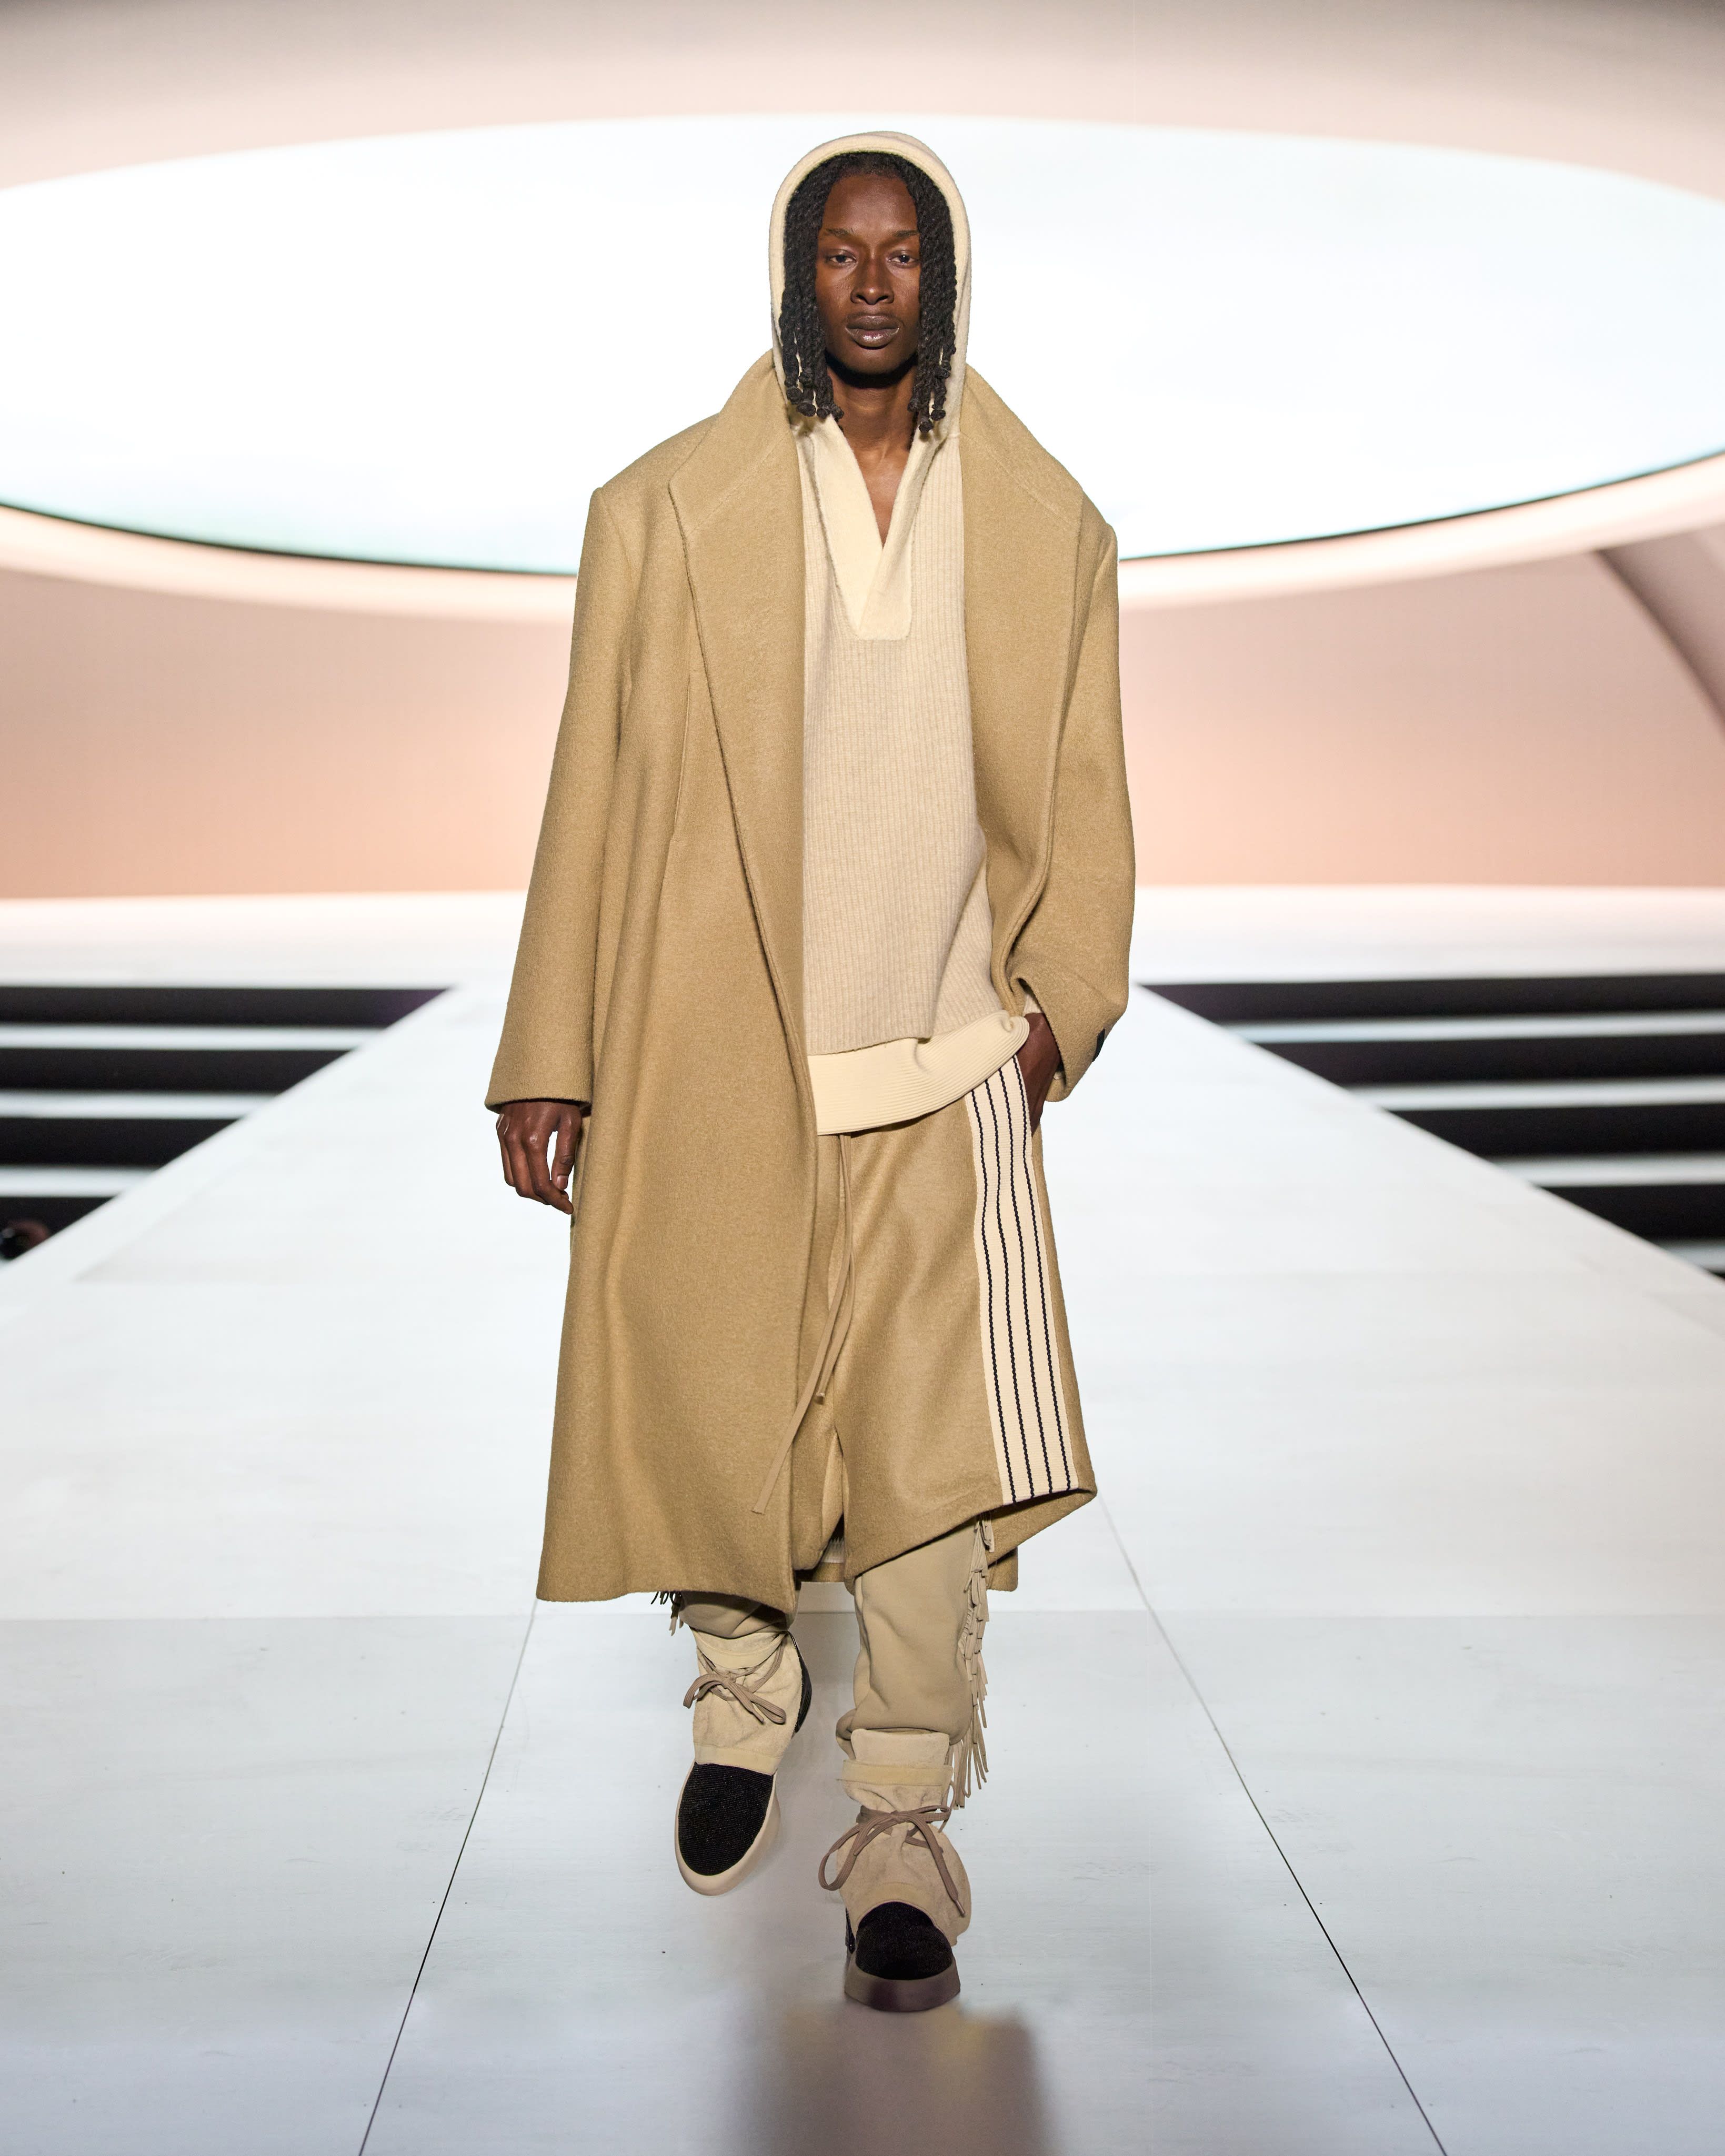 Jerry Lorenzo's Brand Honored at the Shoe Oscars - InClub Magazine